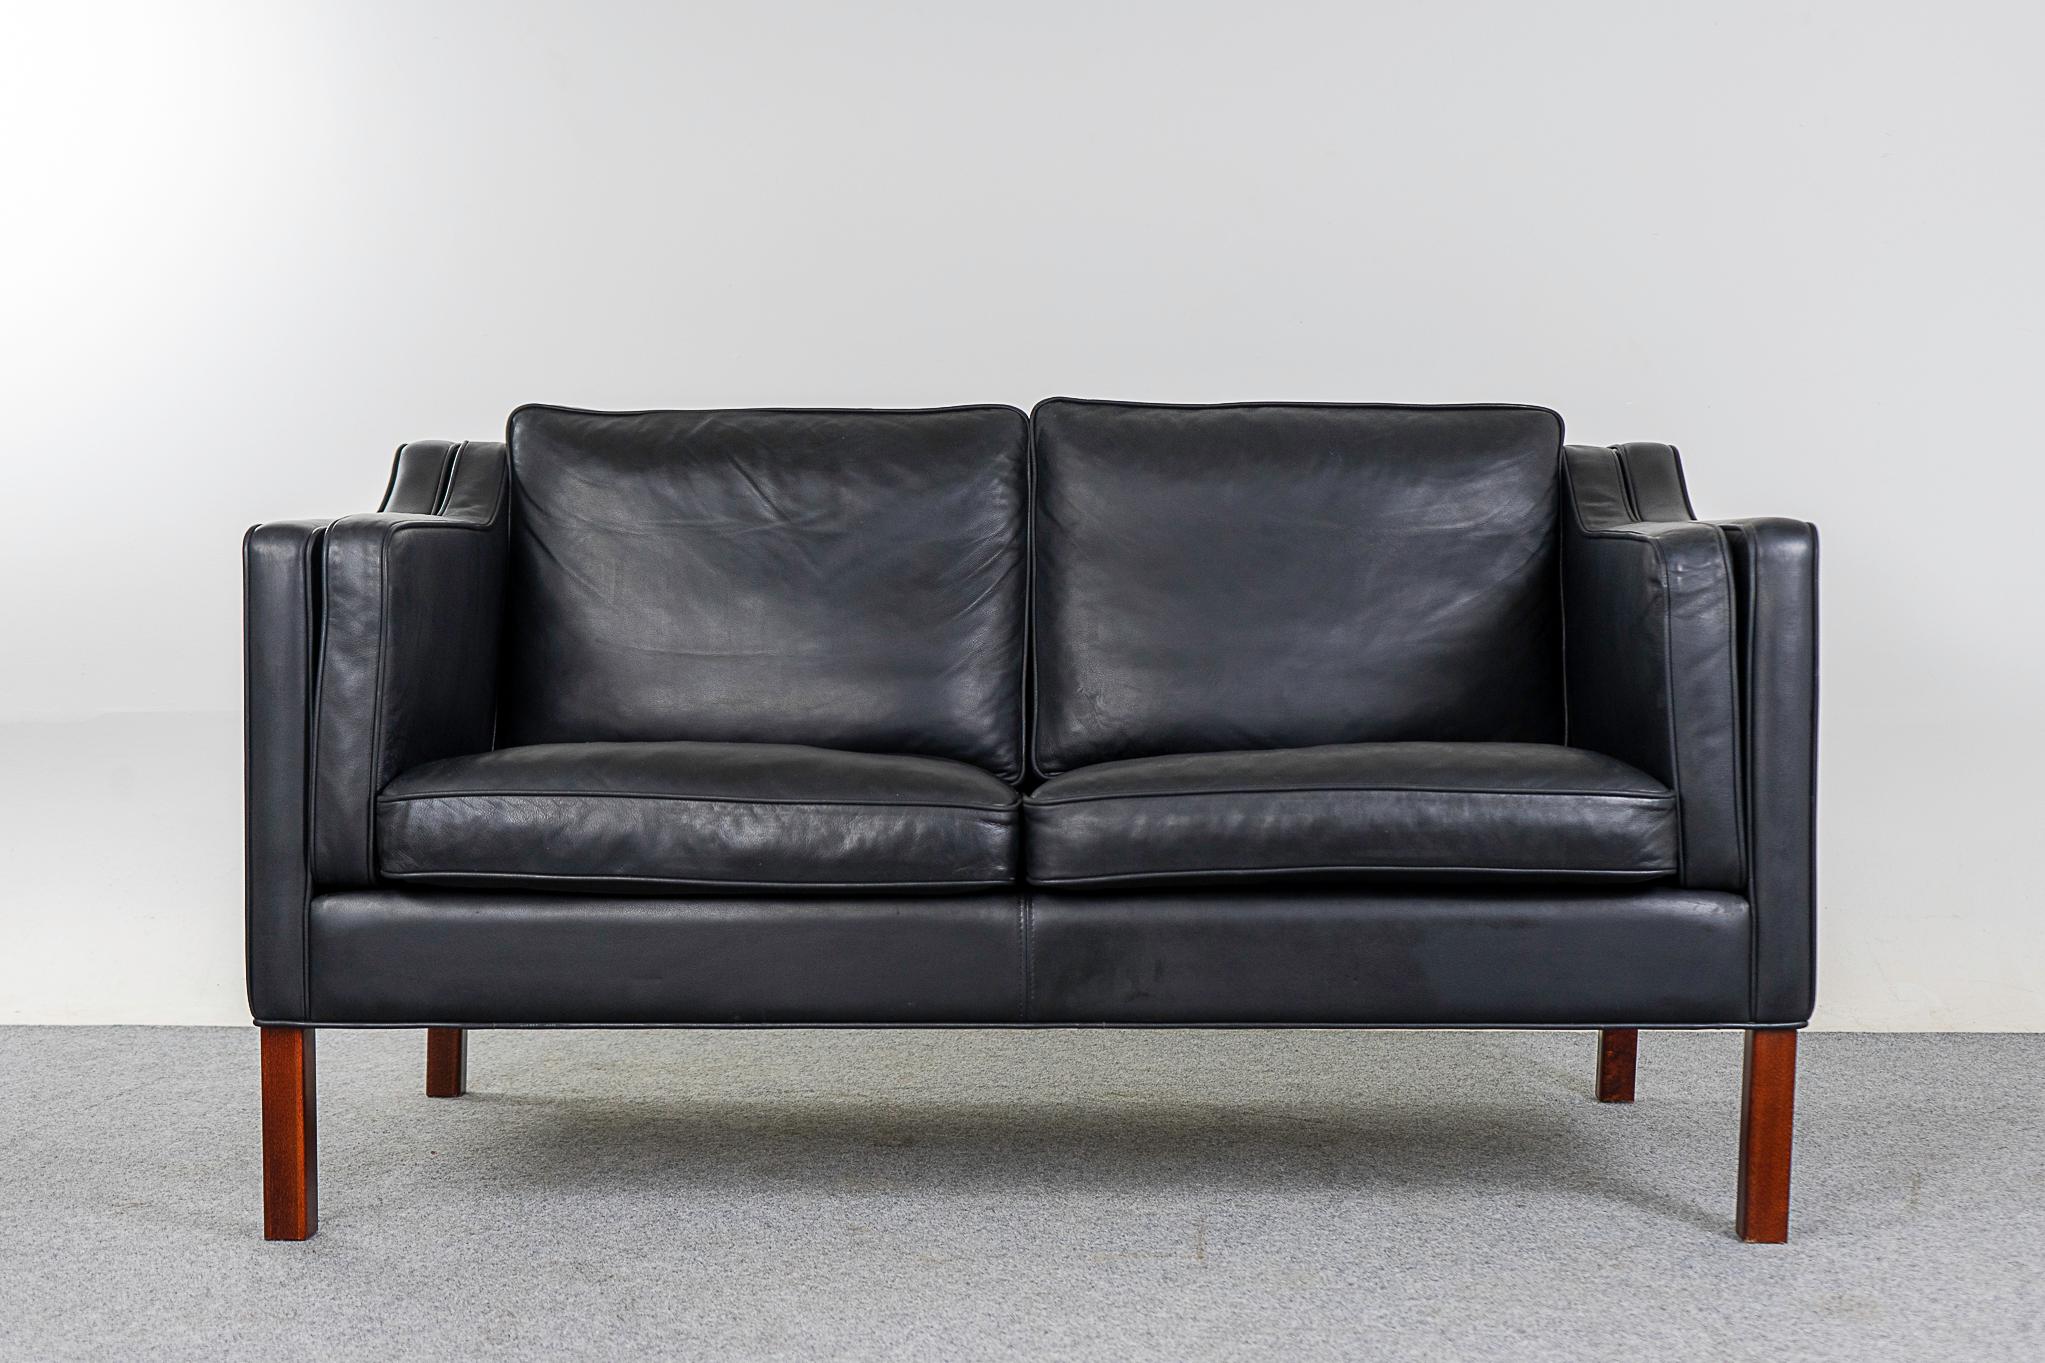 Leather mid-century loveseat, circa 1960's. Original pitch black leather in great condition! Solid wood legs and robust construction. Simple modern lines to suit any decor. Very comfortable, cozy up!